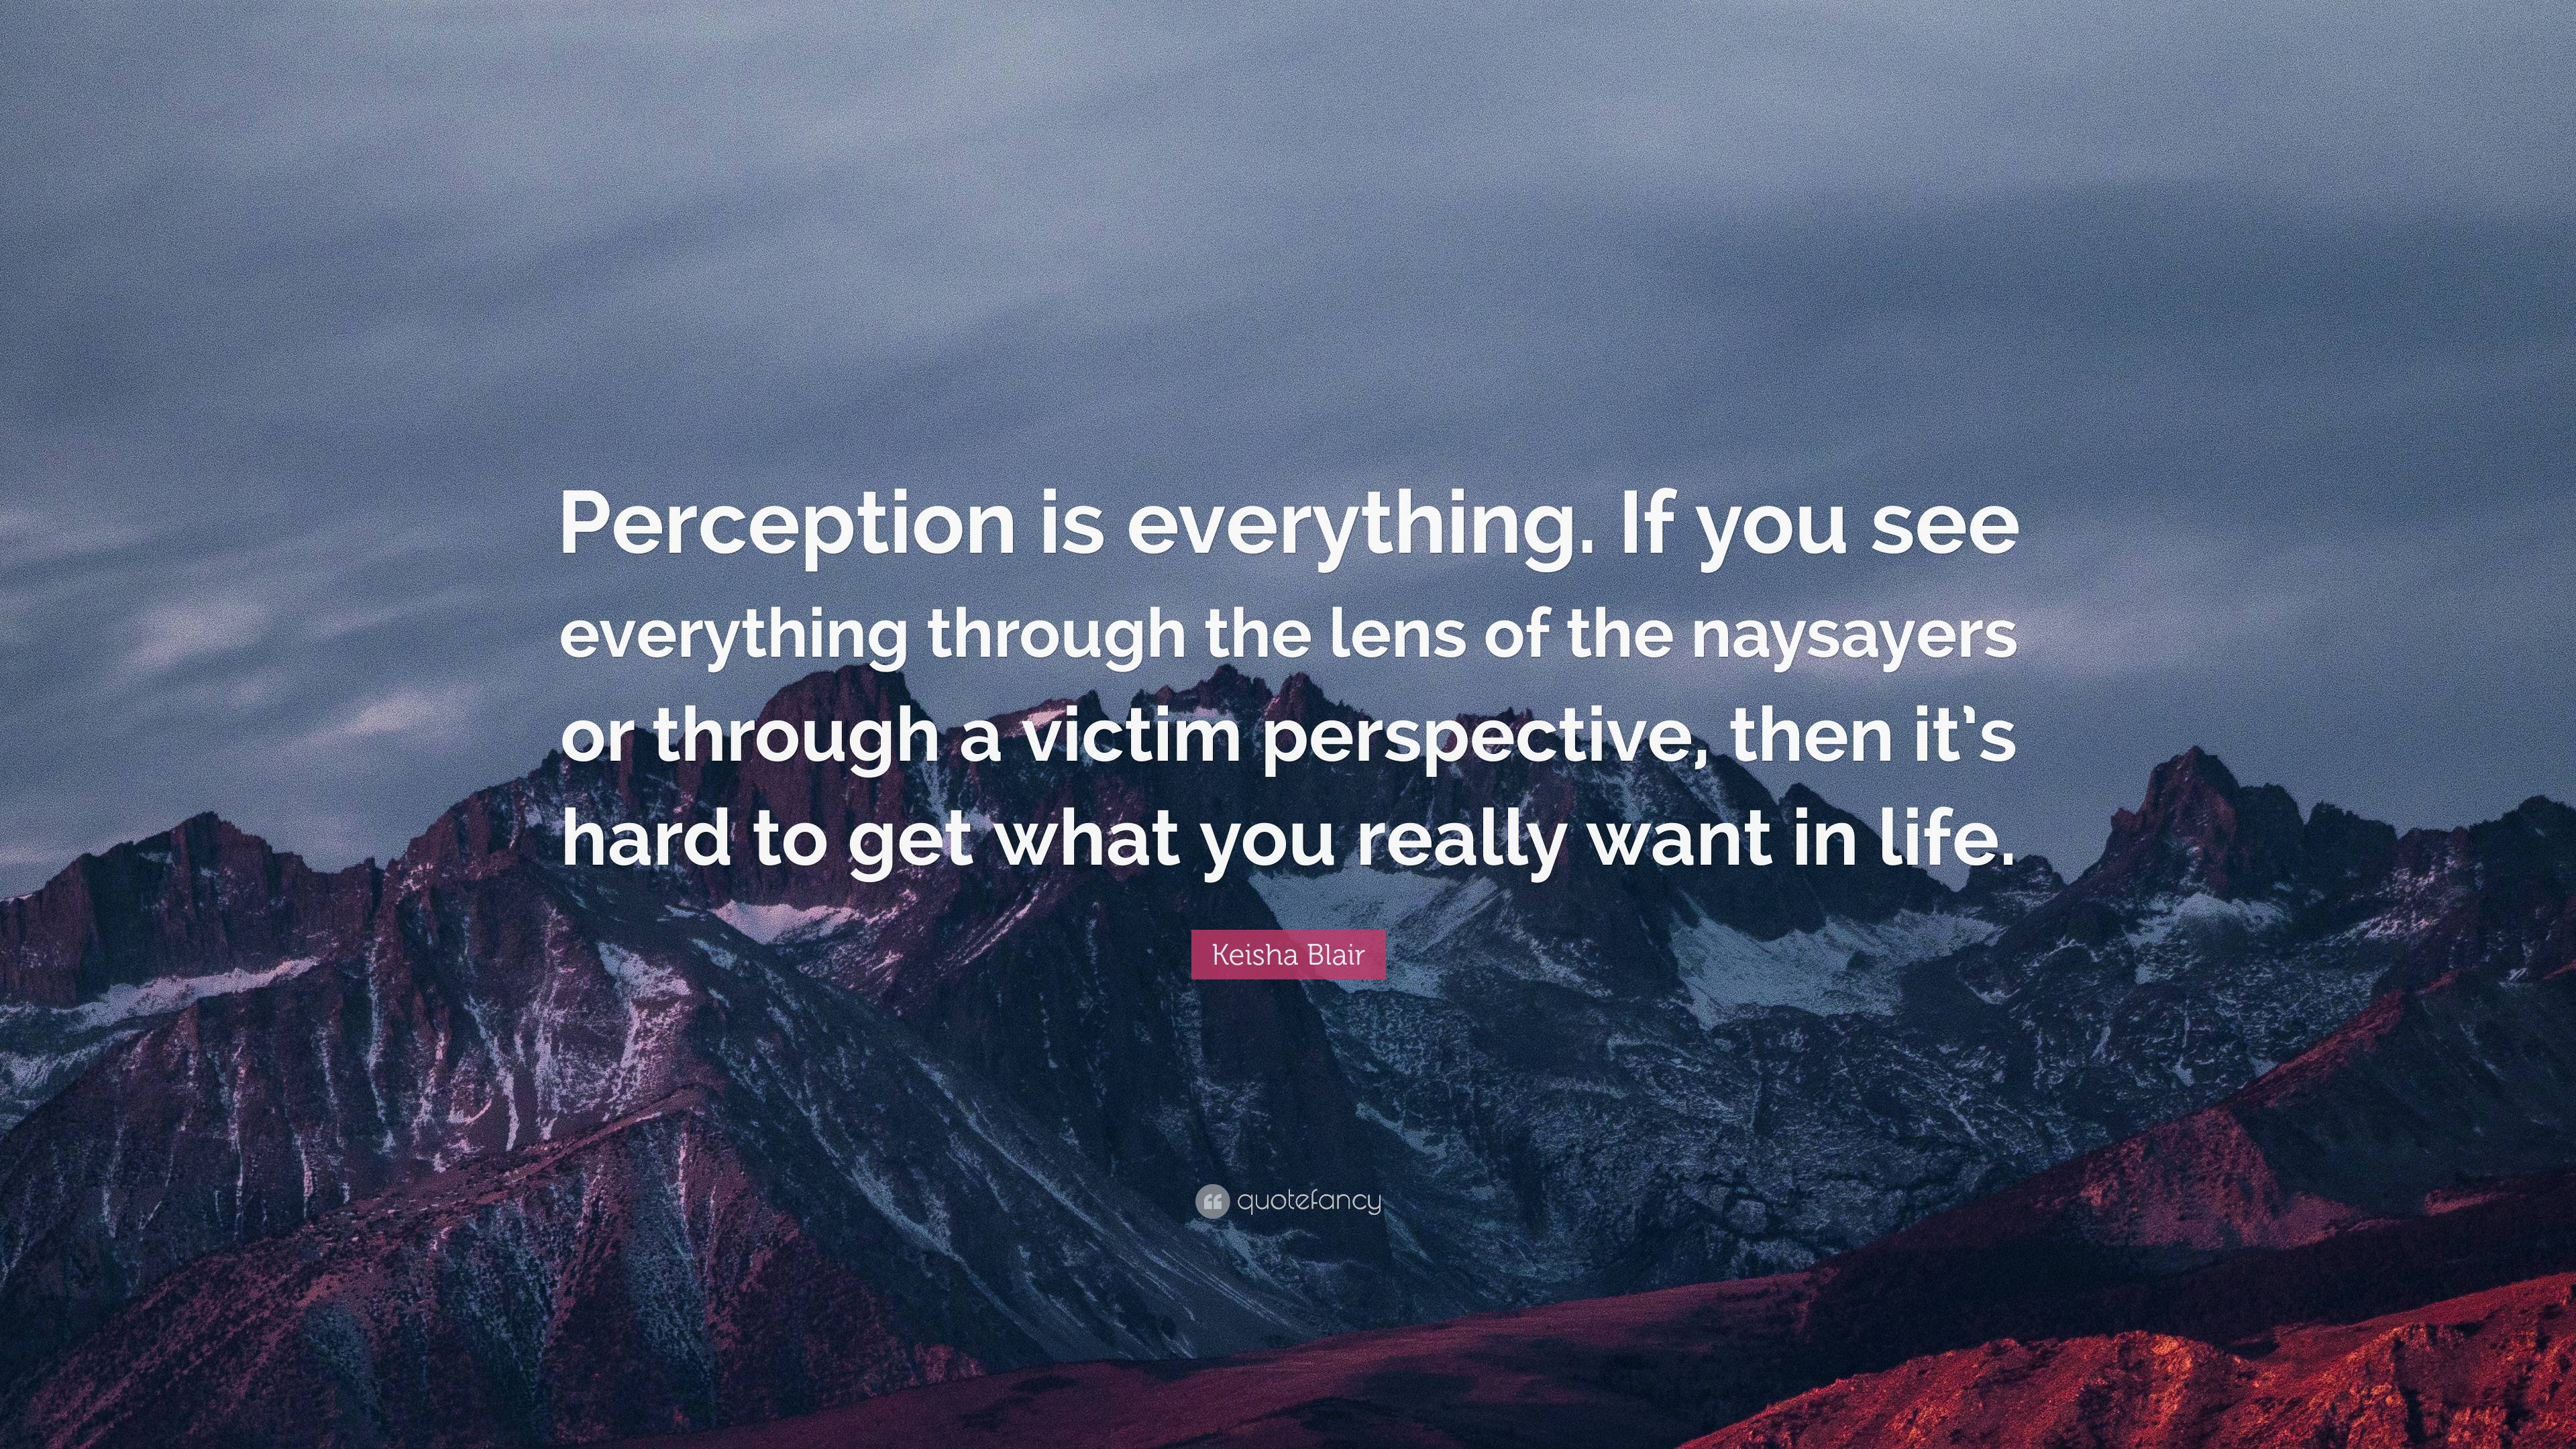 Keisha Blair Quote: “Perception is everything. If you see everything ...